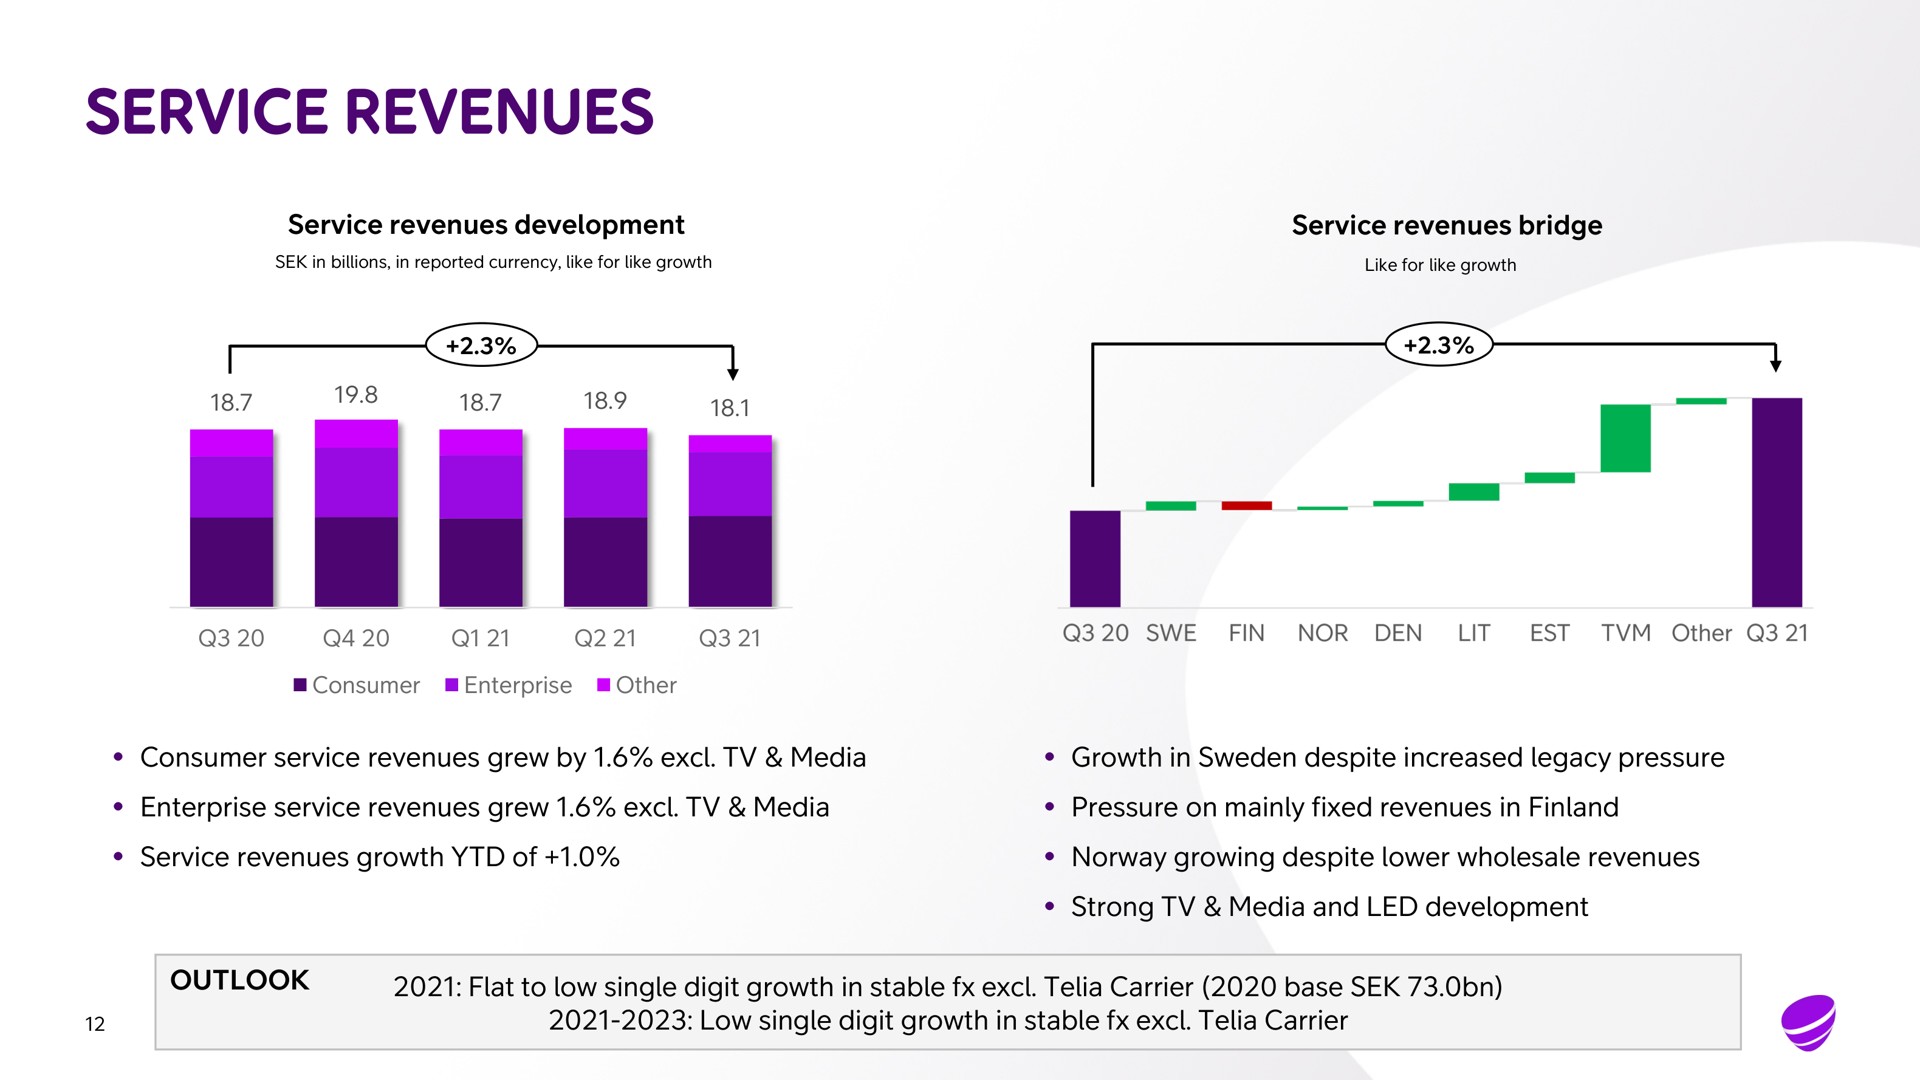 service revenues service revenues development service revenues bridge consumer service revenues grew by media growth in despite increased legacy pressure enterprise service revenues grew media pressure on mainly fixed revenues in finland service revenues growth of growing despite lower wholesale revenues strong media and led development outlook flat to low single digit growth in stable carrier base low single digit growth in stable carrier | Telia Company